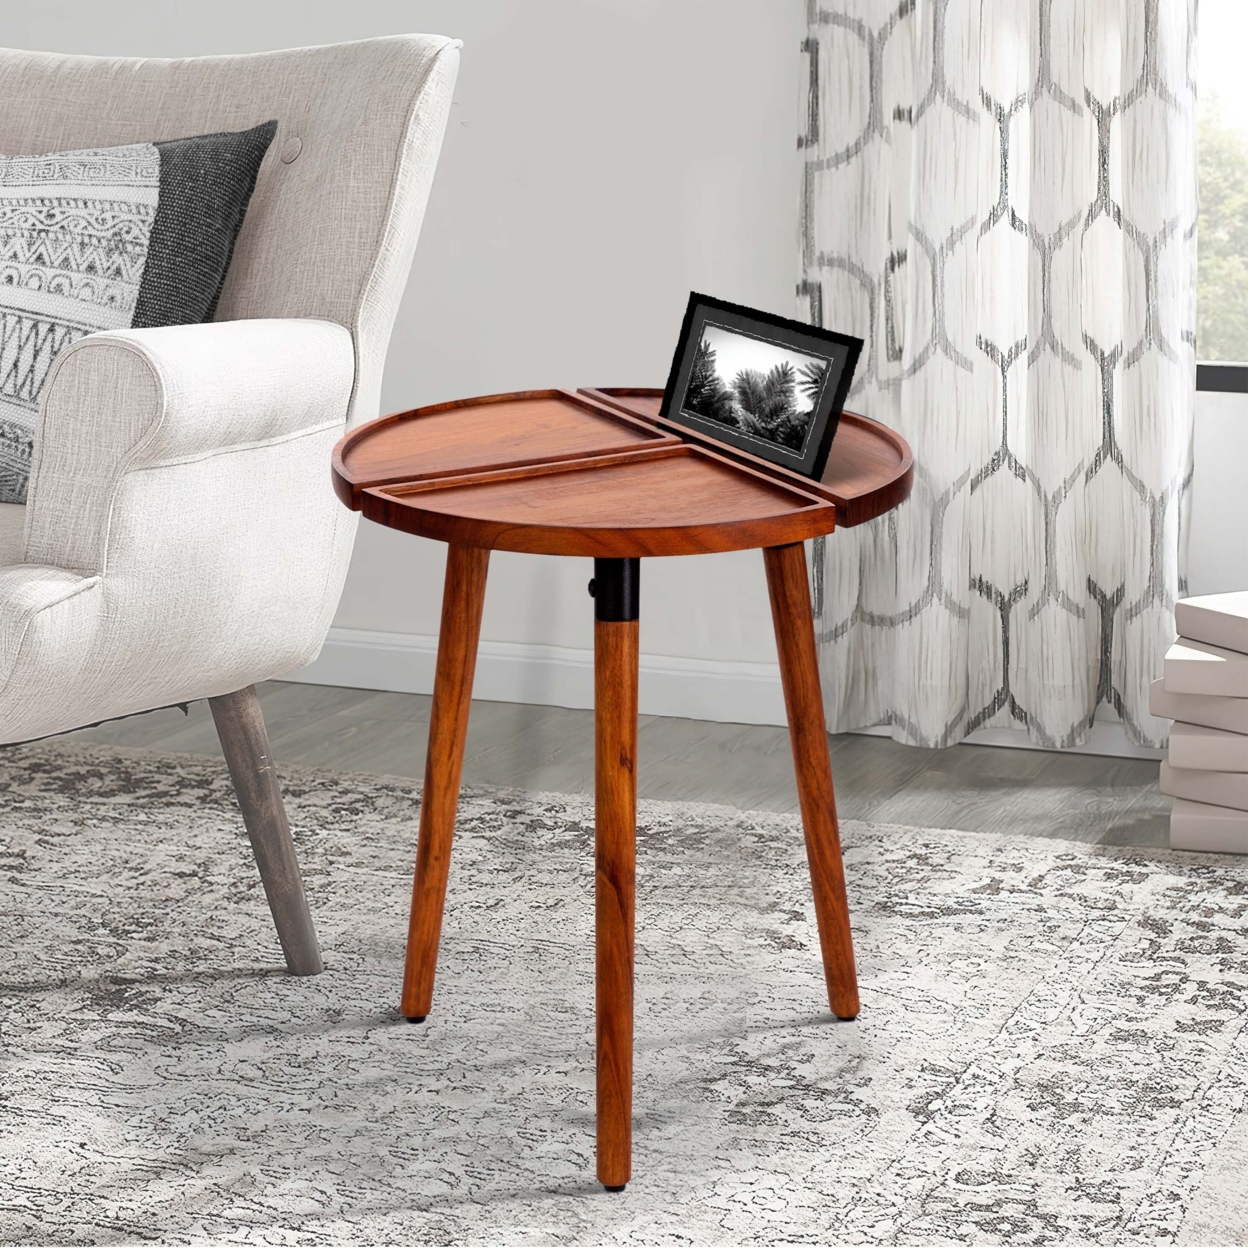 18 Inch Round Acacia Wood Side Accent End Table With 3 Tabletop Sections, Warm Brown- Saltoro Sherpi